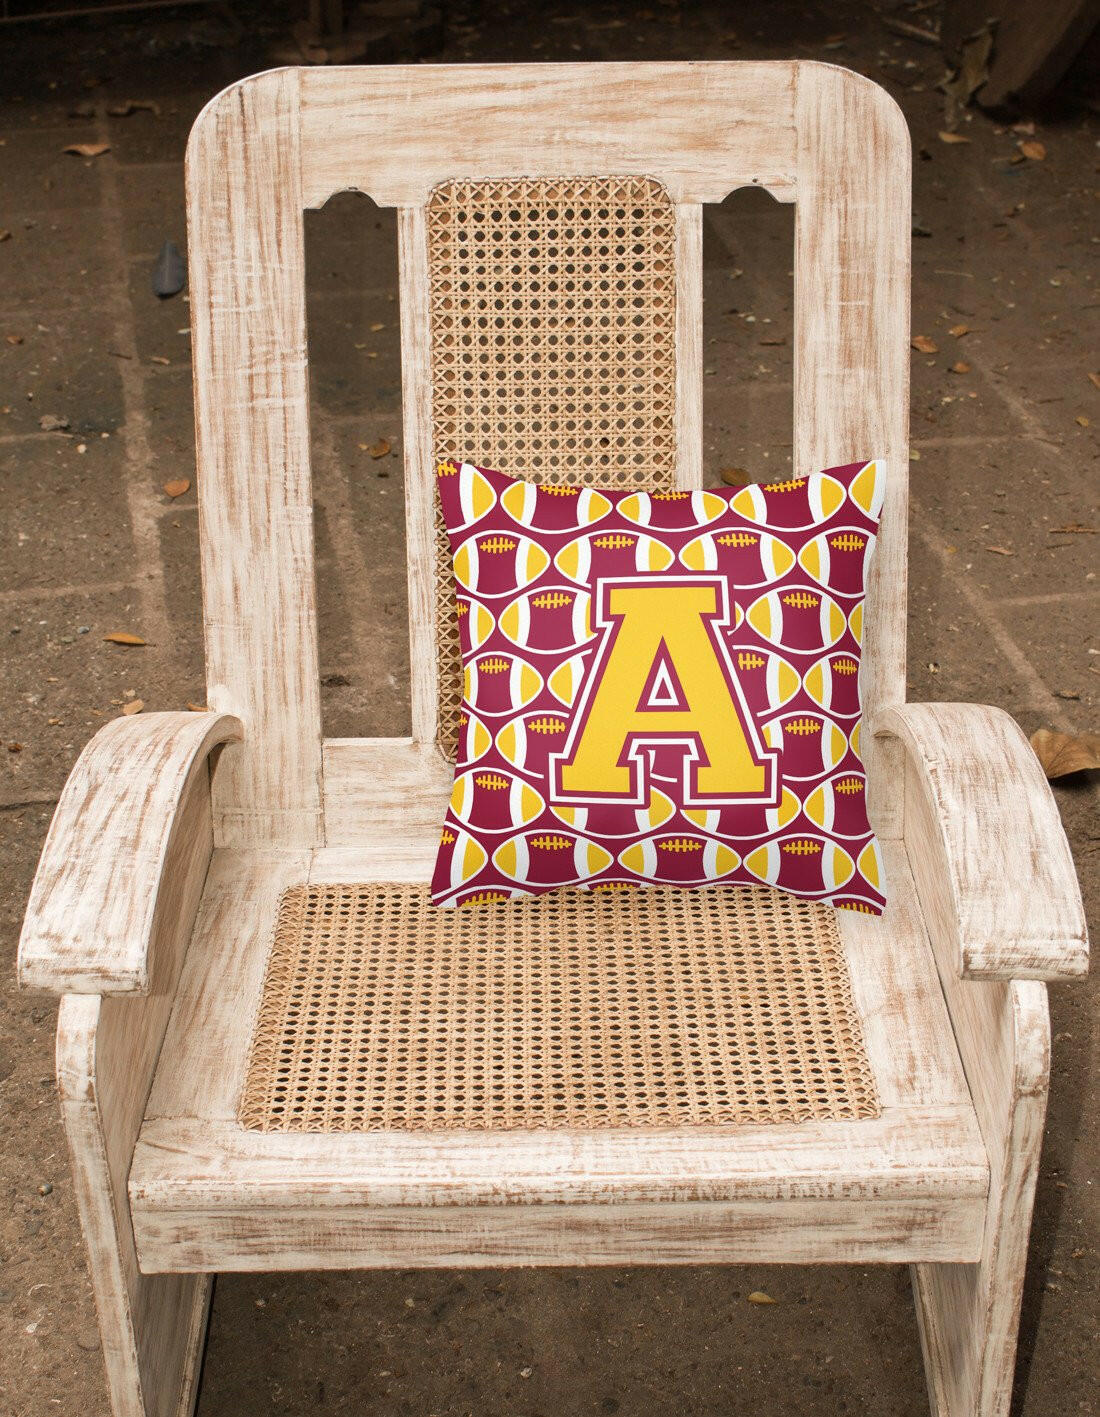 Letter A Football Maroon and Gold Fabric Decorative Pillow CJ1081-APW1414 by Caroline's Treasures